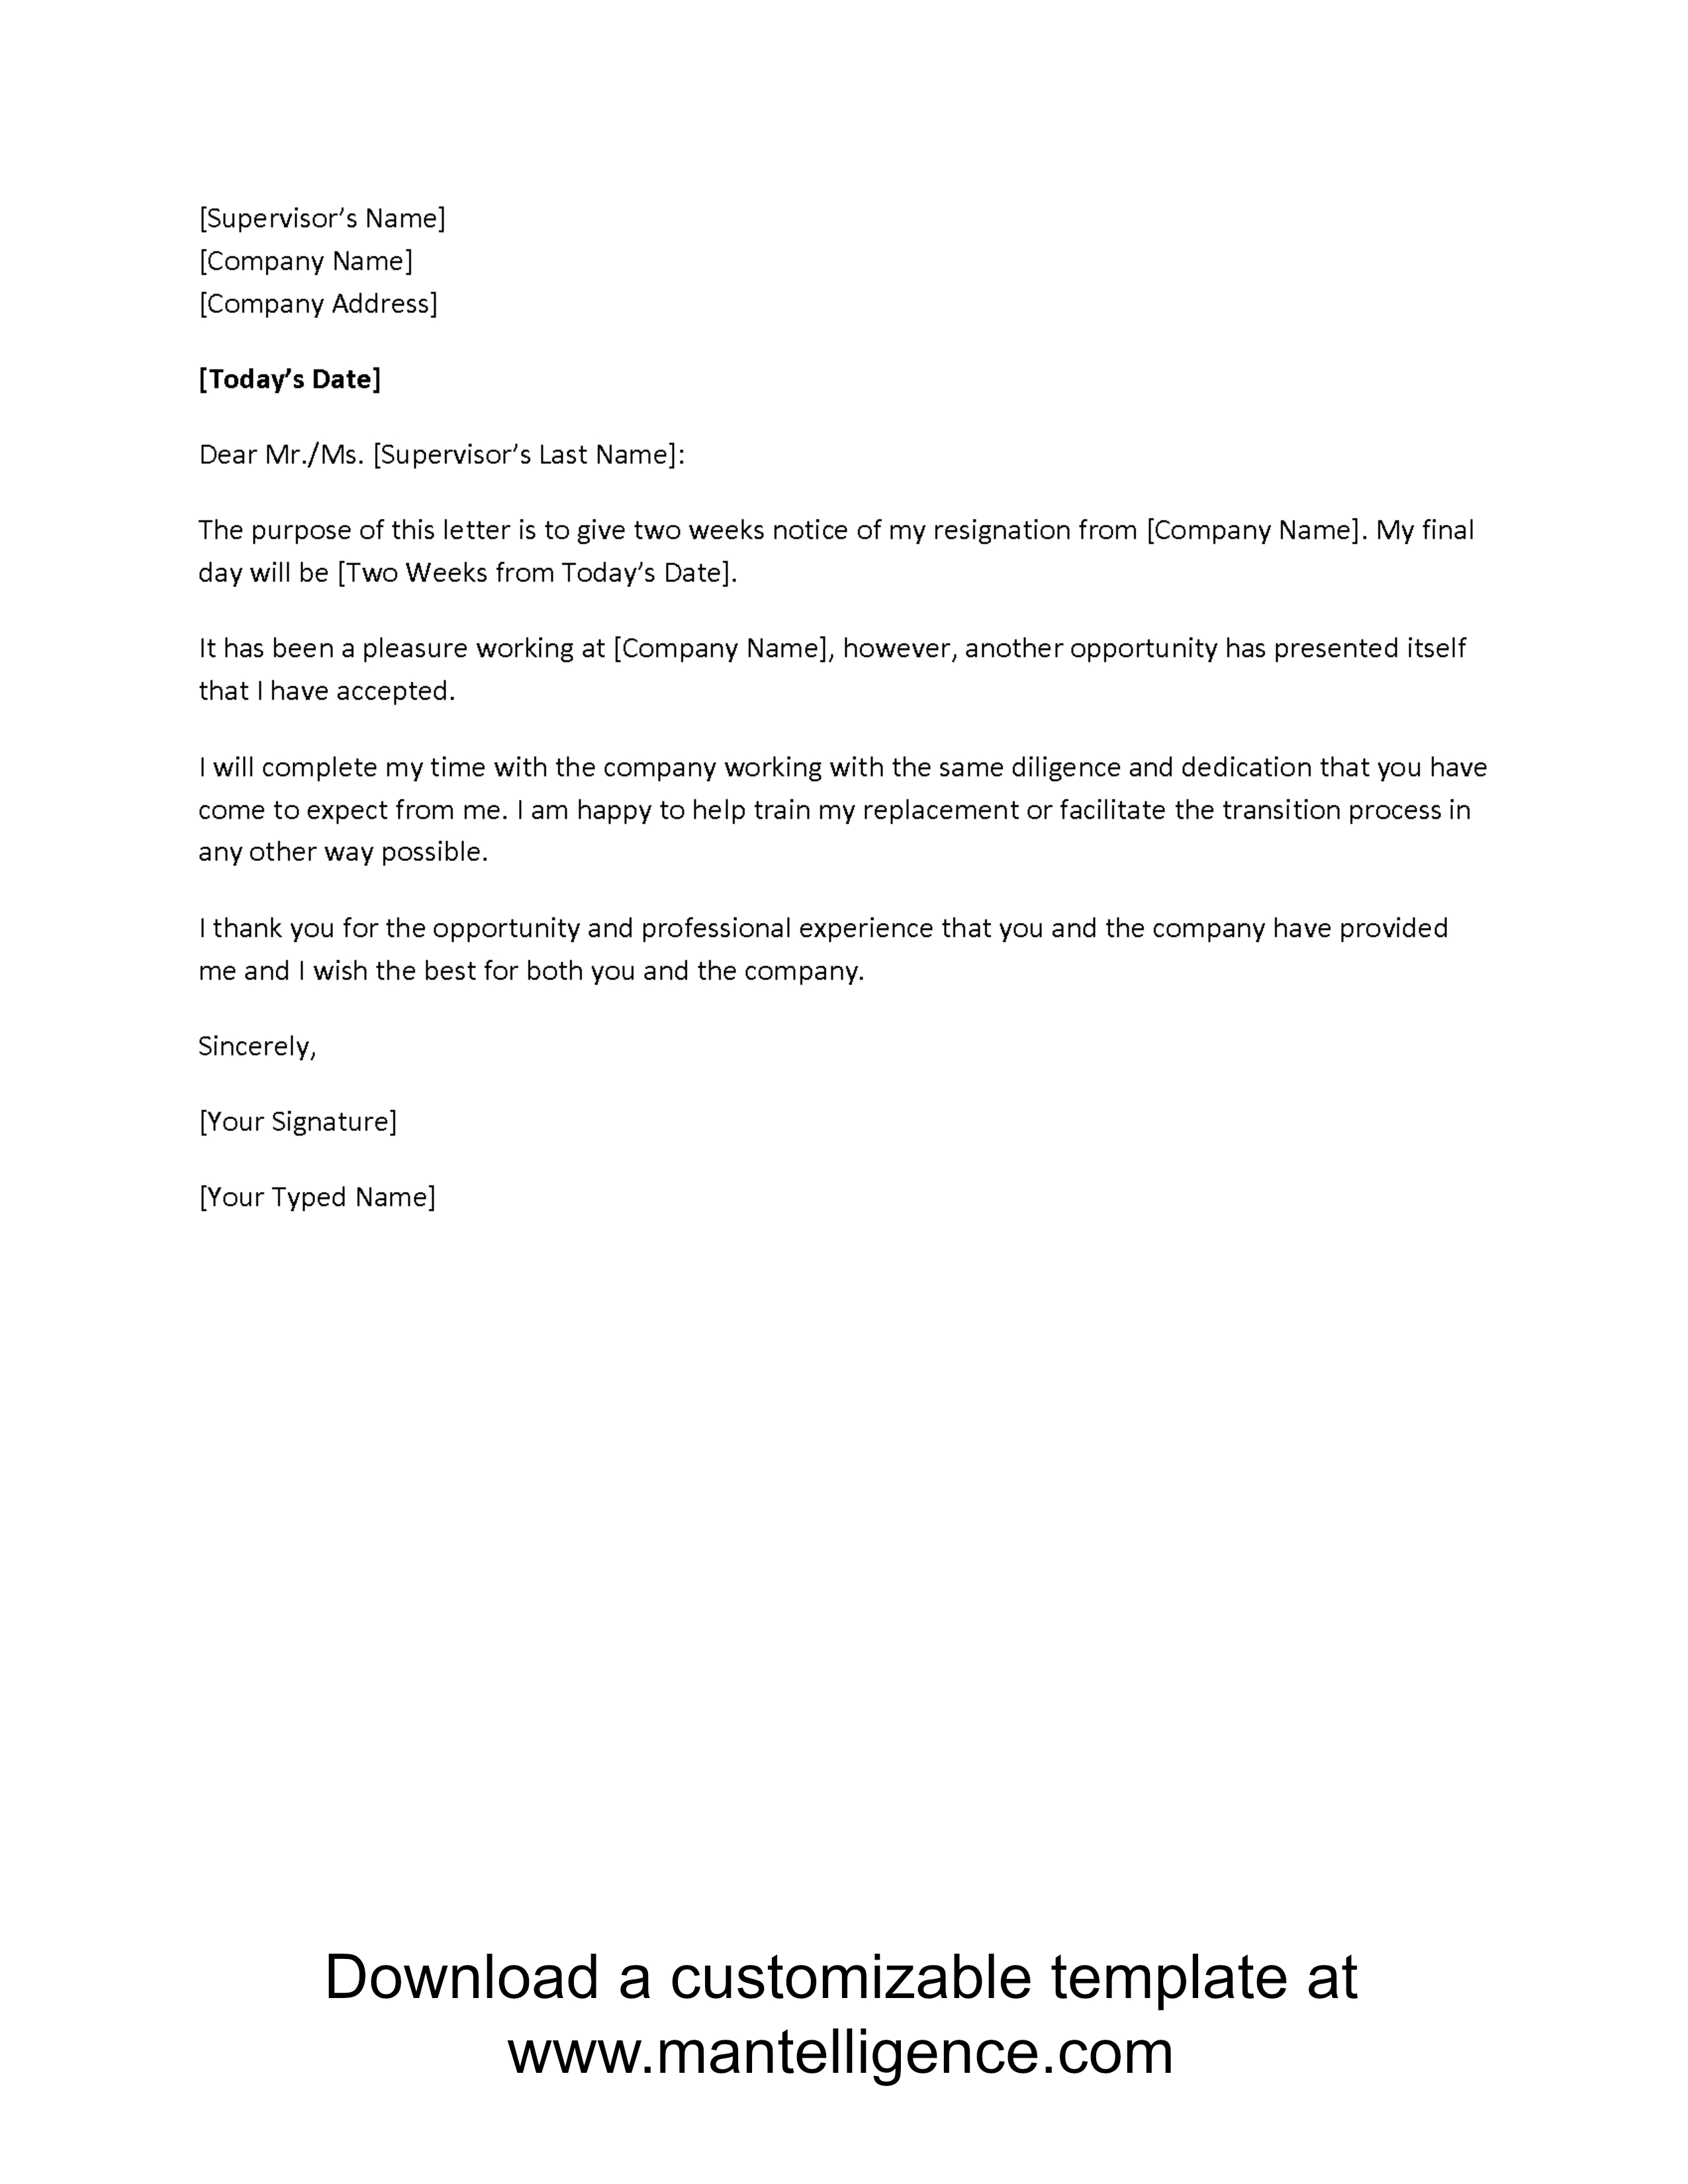 Resignation Letter Free Template Download - 3 Highly Professional Two Weeks Notice Letter Templates